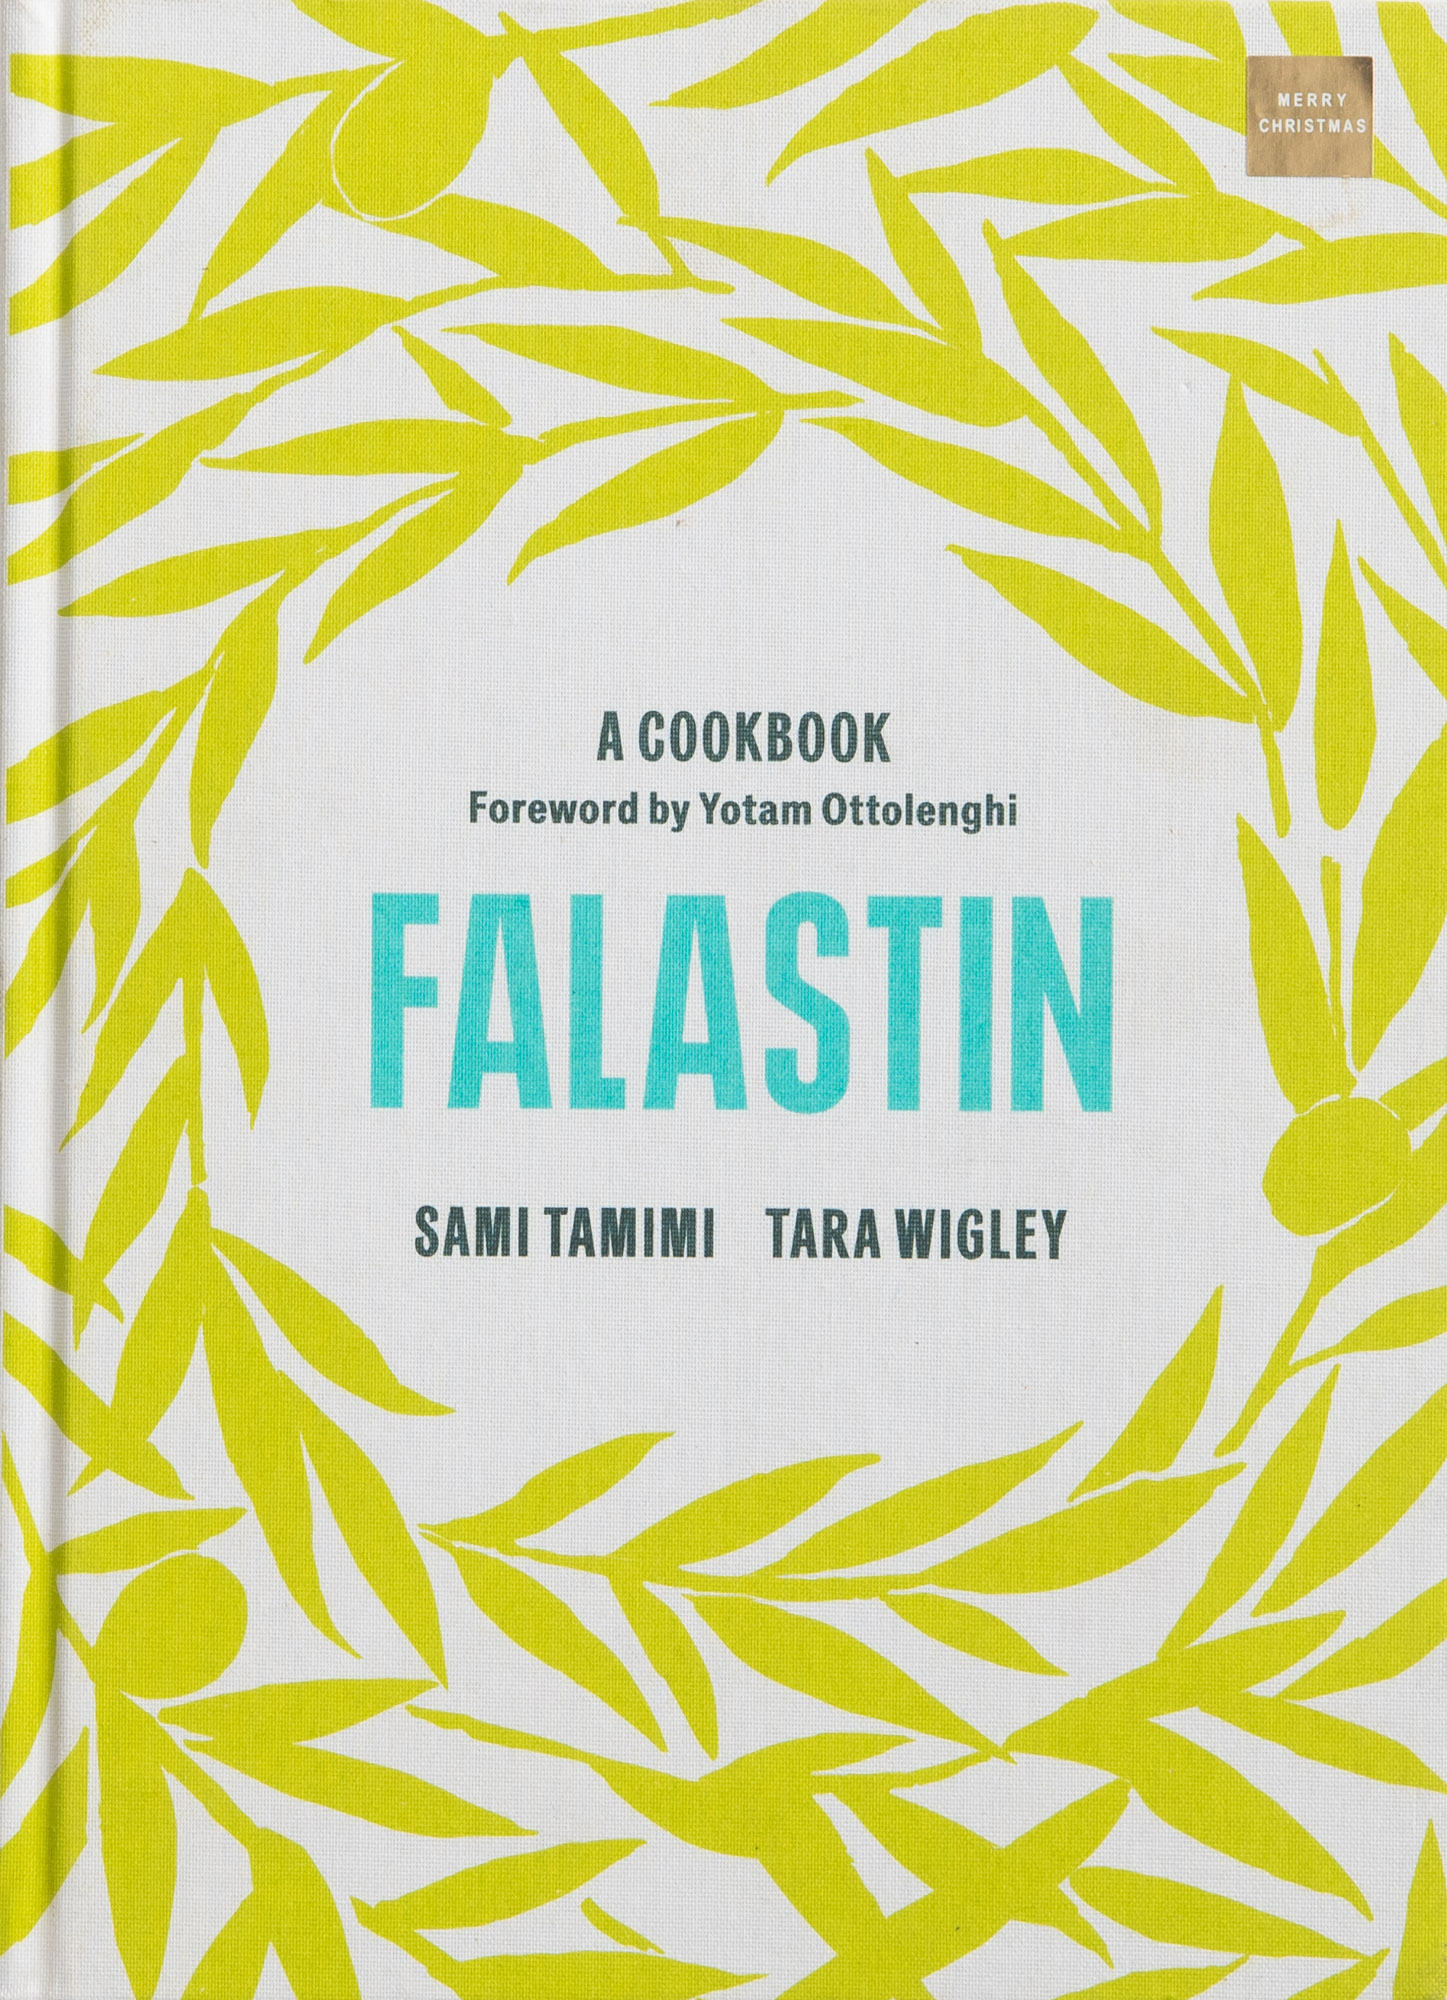 The cover of Falastin, a cookbook by Sami Tamimi